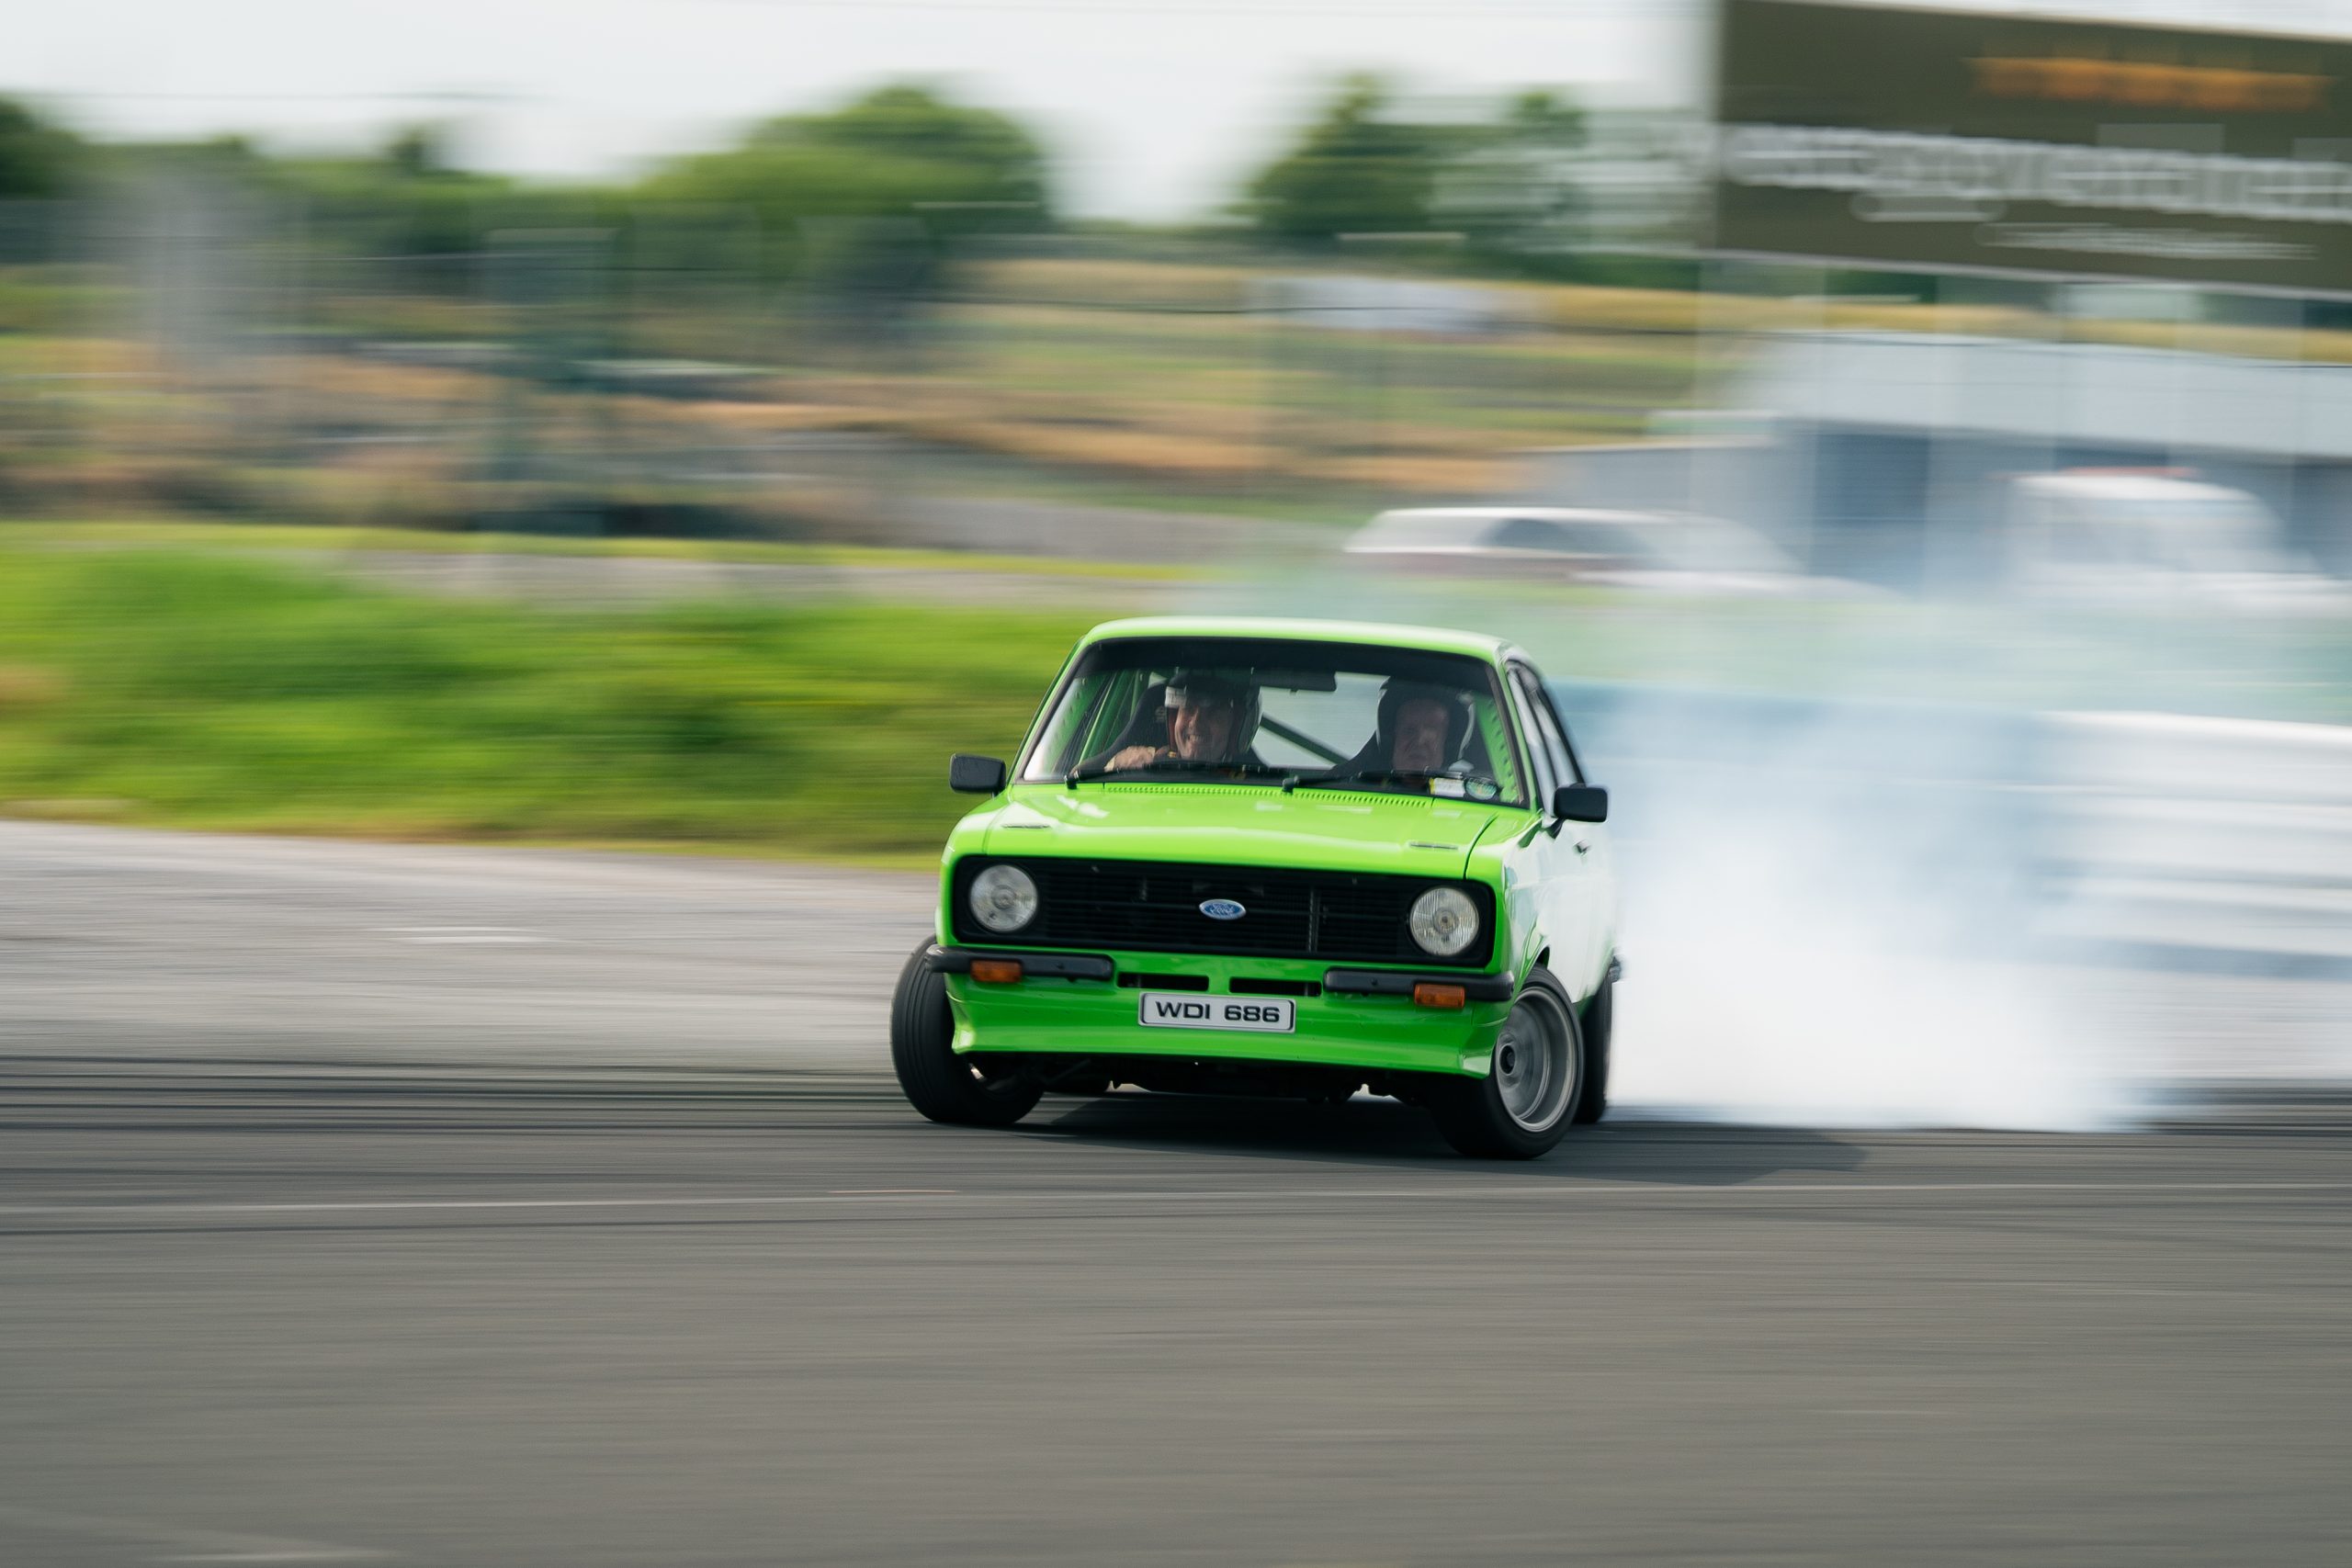 Image of a green ford escort drifting sideway with smoke coming from the back wheels